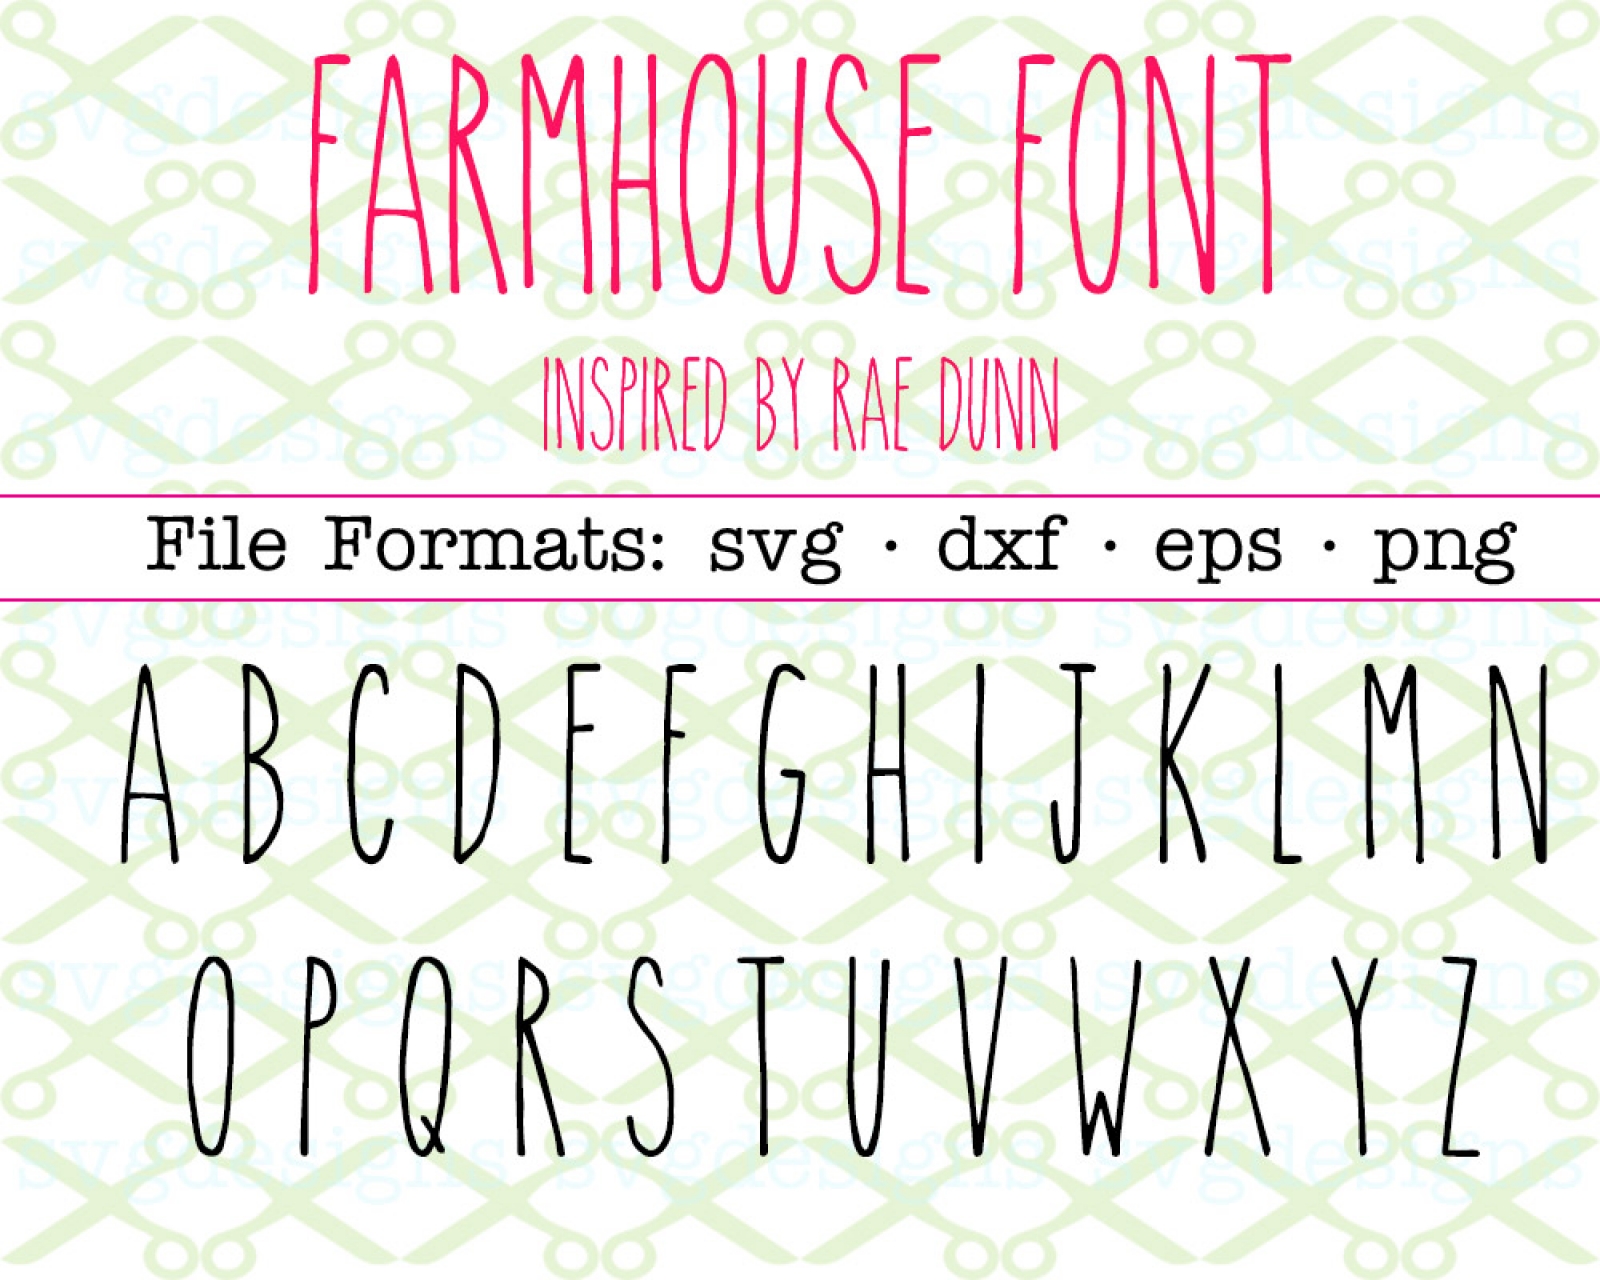 Farmhouse Font Svg Files For Cricut And Silhouette Files Svg Dxf Eps Png